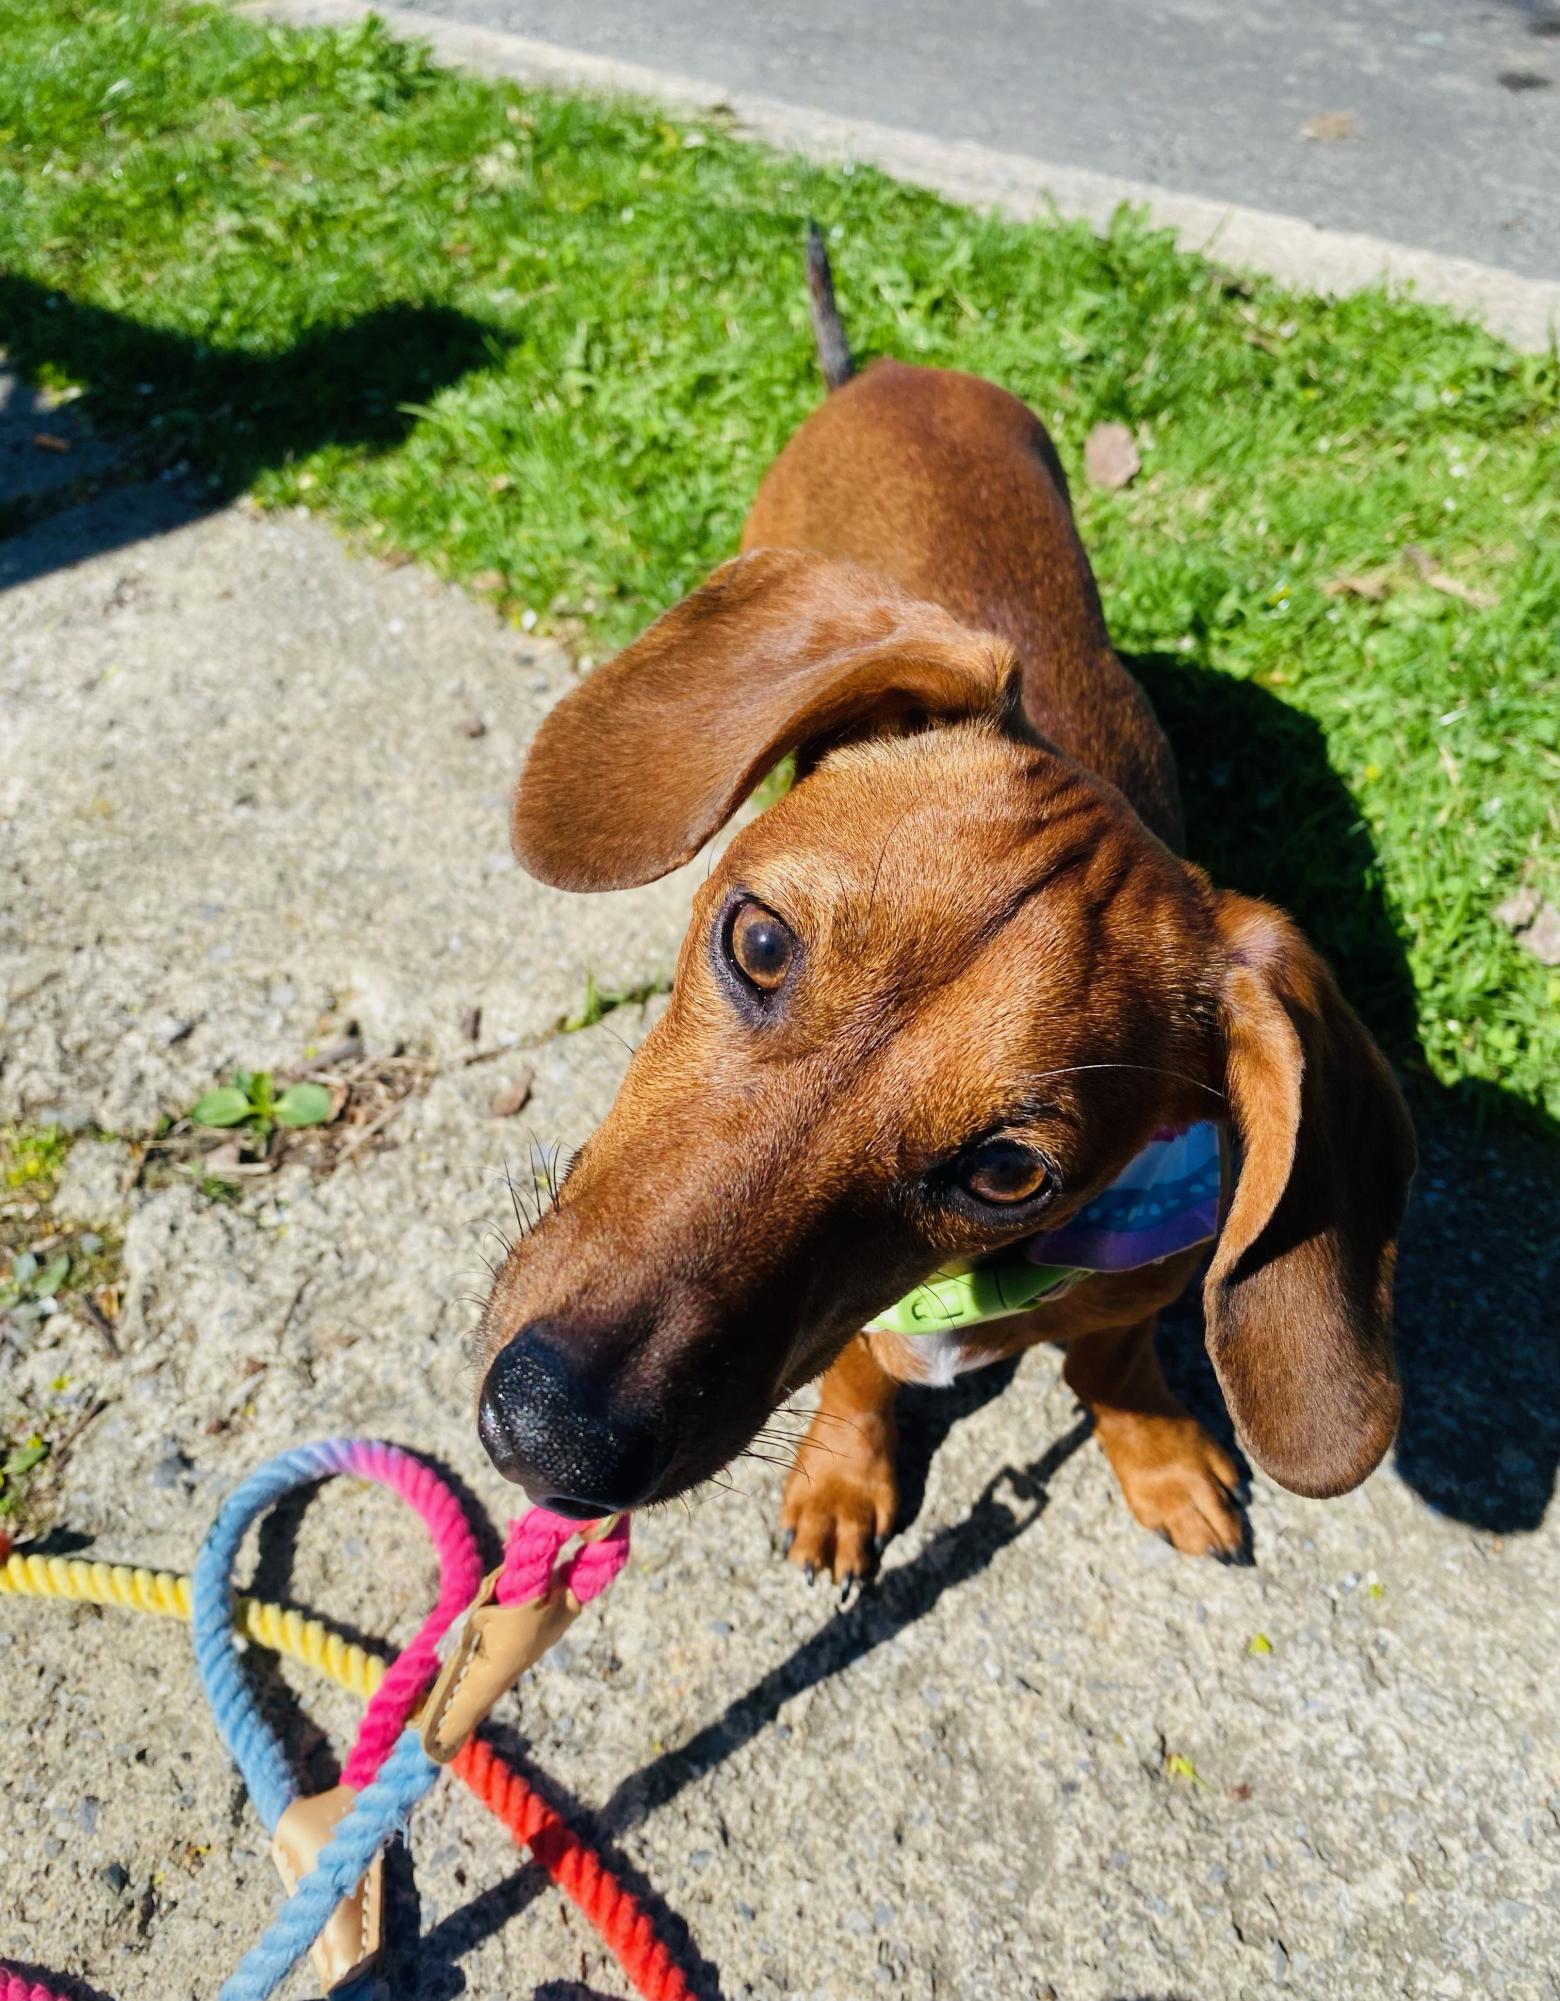 Pretty Poppy! This is Poppy the Dachshund. She was two-years-old, and enjoyed naps, playing with toys and eating bell peppers. According to her owner Lydia Schimansky, I love Poppy so much, I couldnt have asked for a better dog!